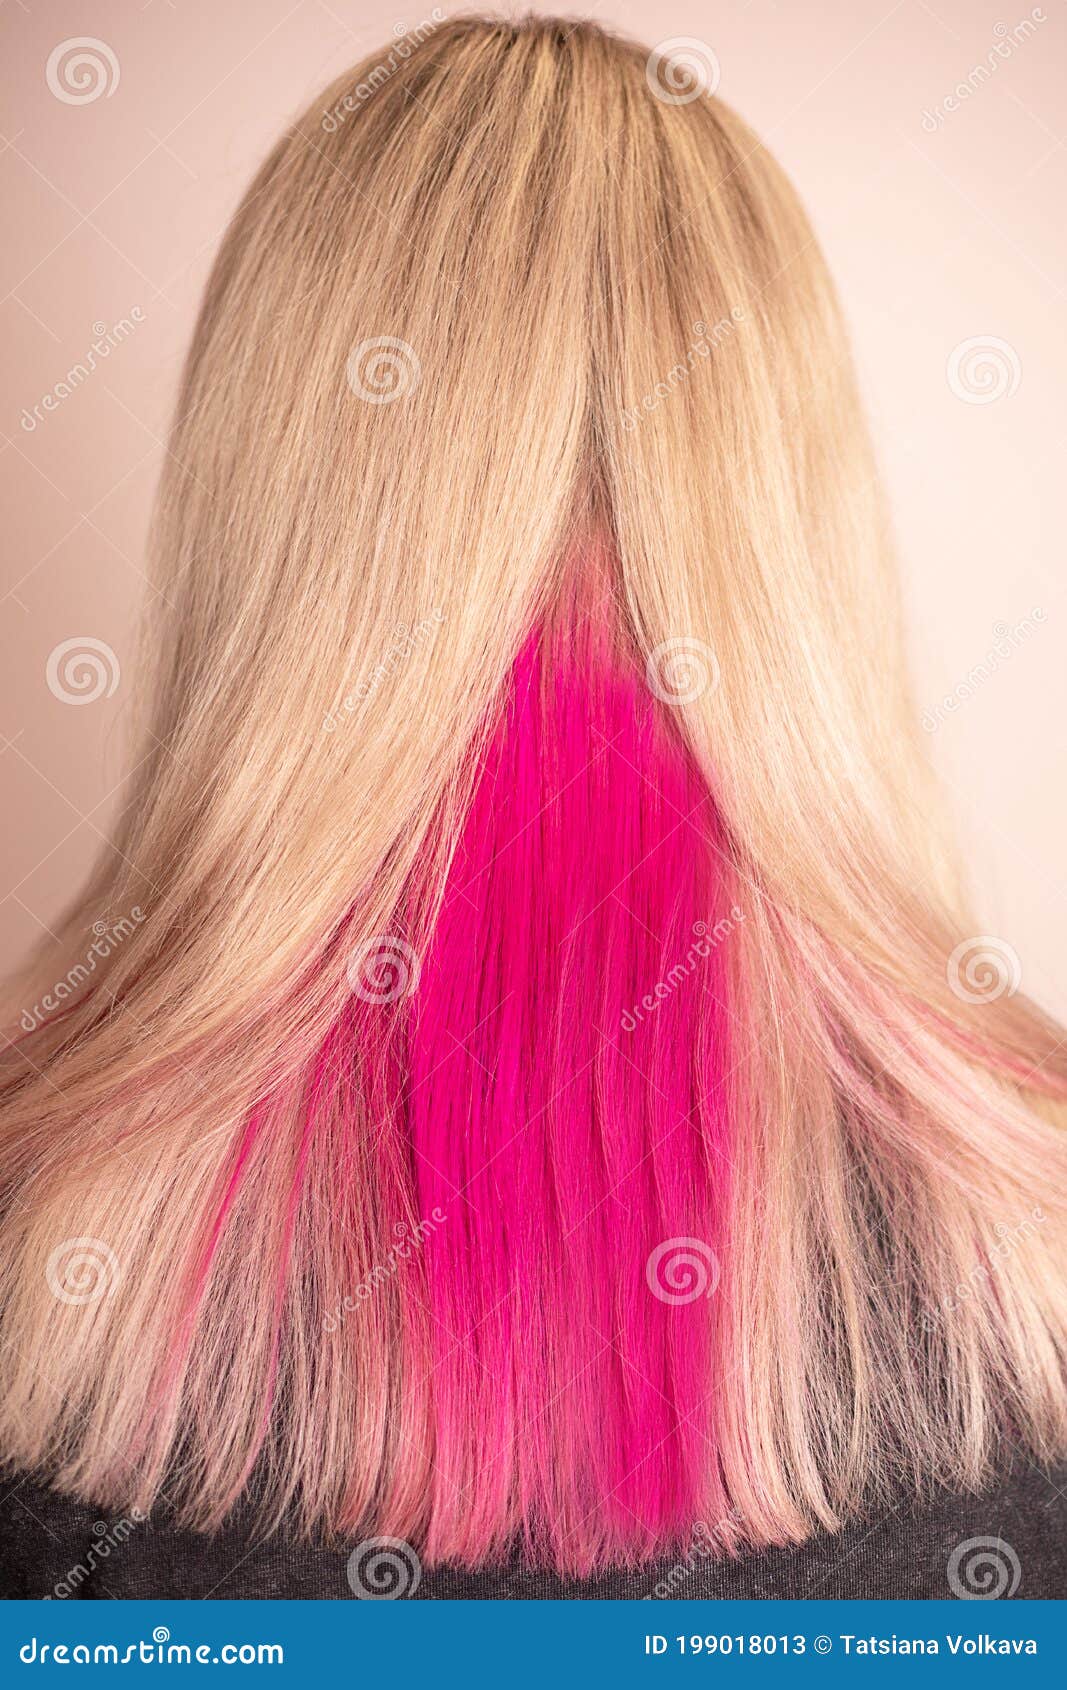 Closeup Shoot of Female Head with Fresh Dyeing Blond Pink Color Hair. Back  Veiw Stock Image - Image of blonde, hairstyle: 199018013